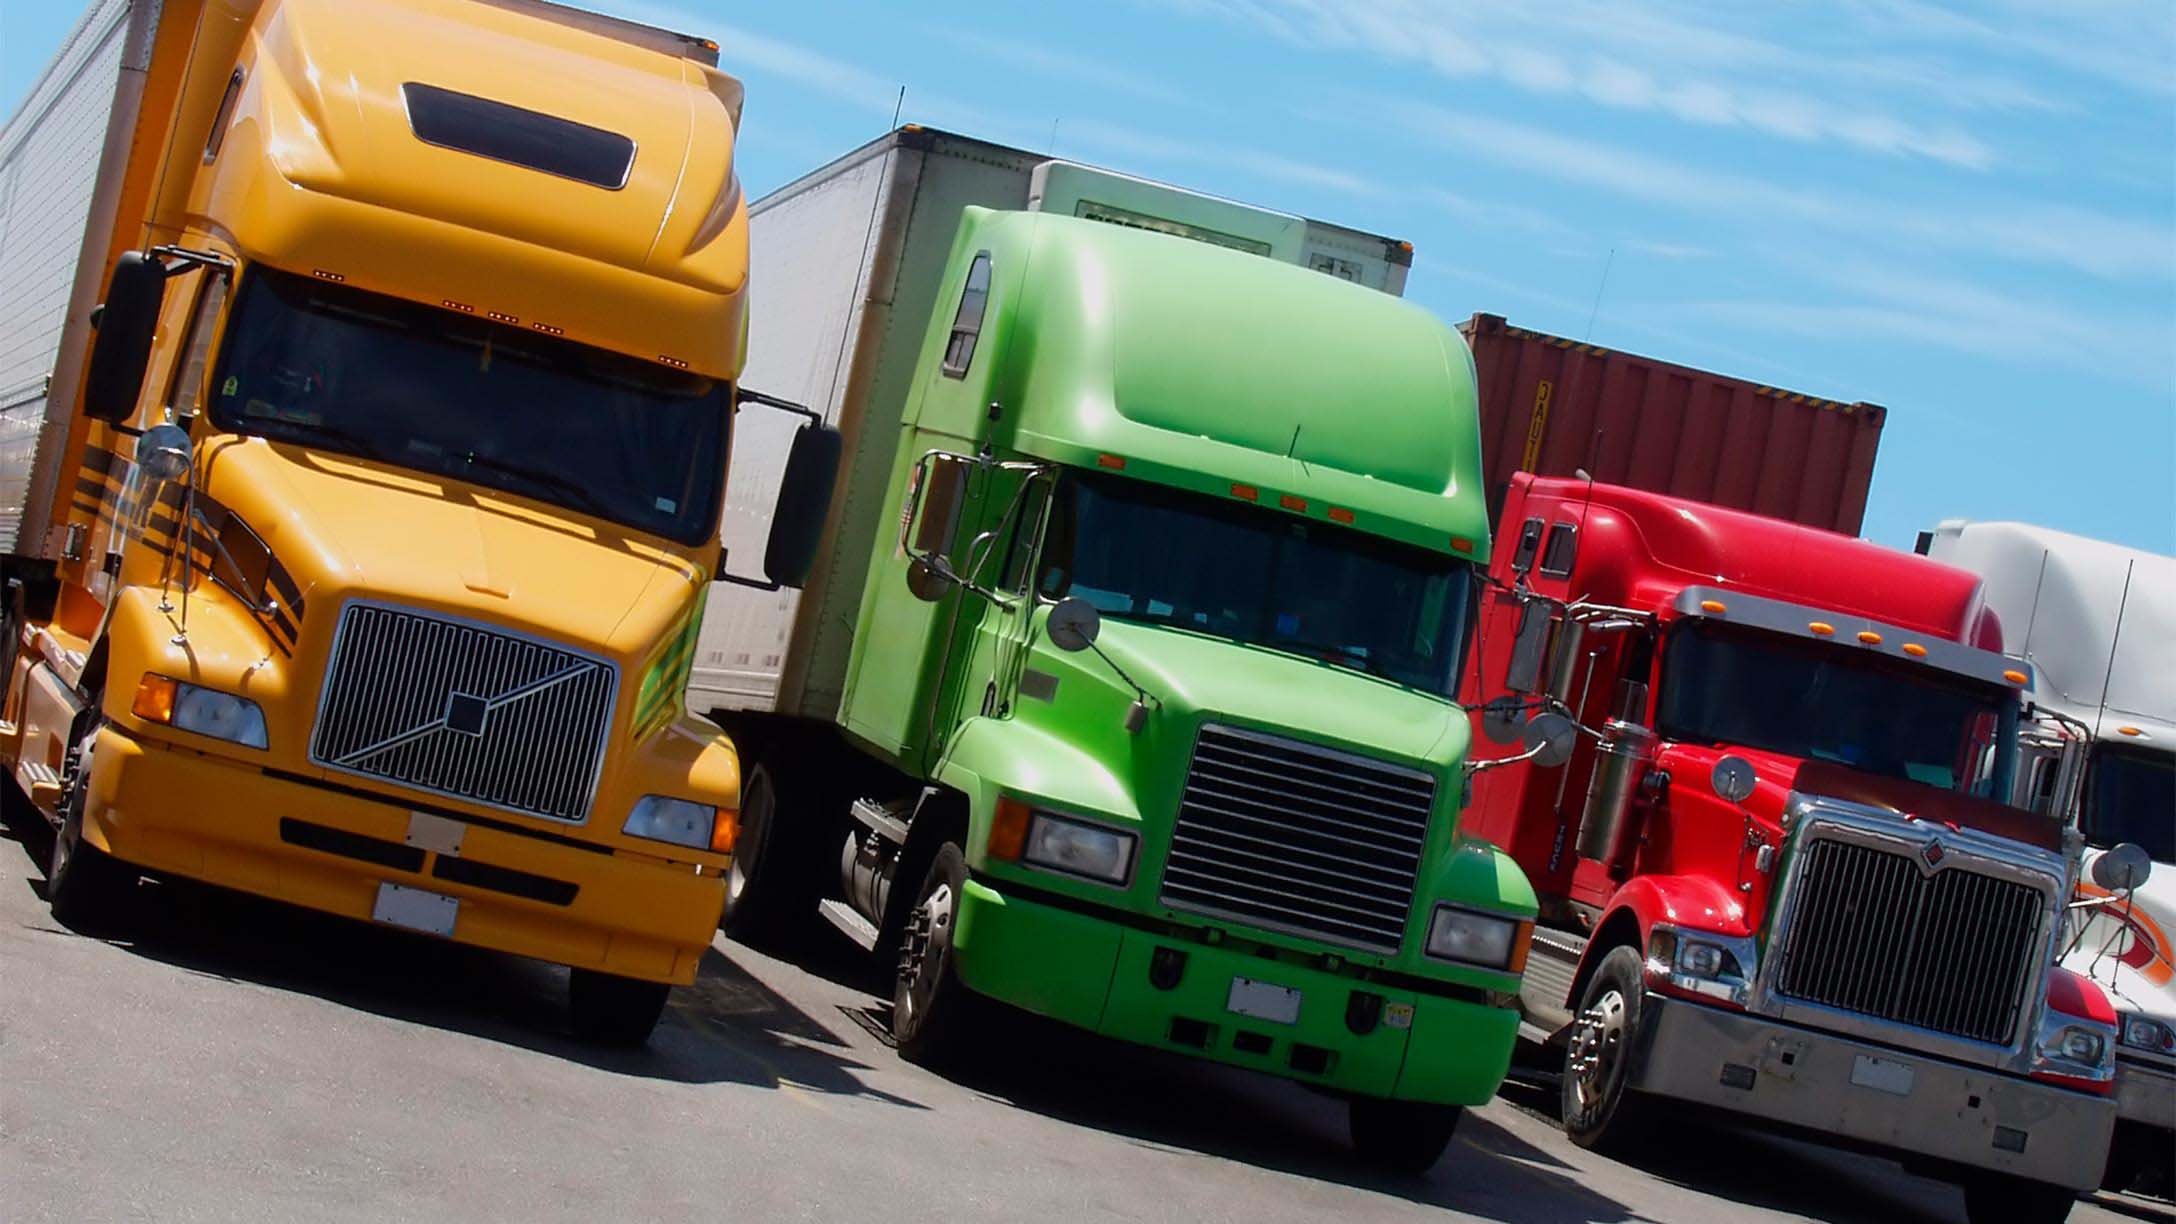 Three semi trucks lined up, one is yellow, one is green and one is red